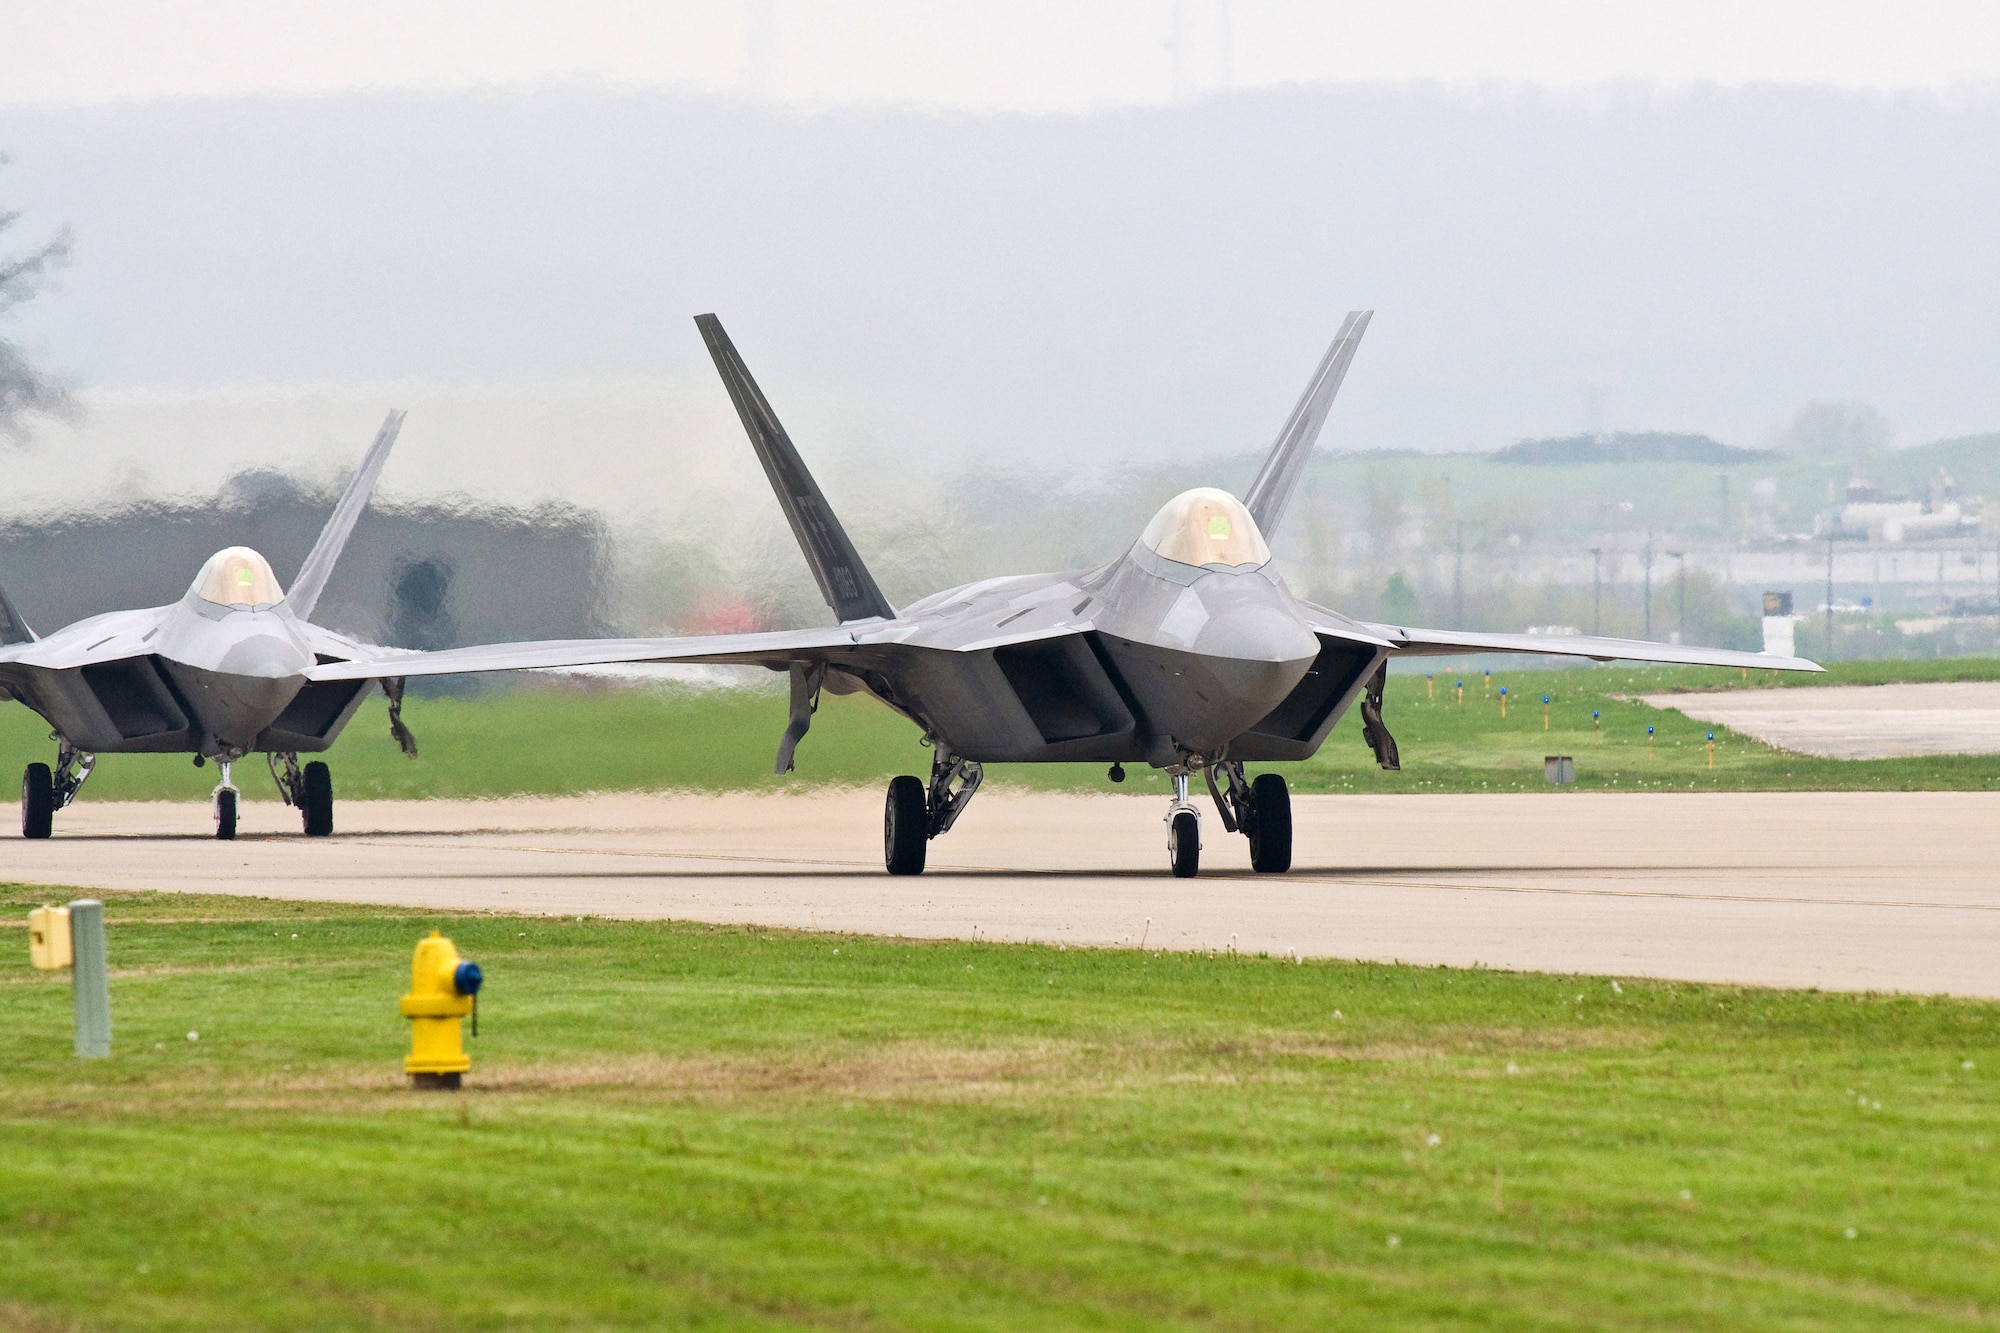 Two Air Force F-22 Raptors taxi on the flightline of the Kentucky Air National Guard Base in Louisville, Ky., April 16. The aircraft are assigned to the USAF Raptor Aerial Demonstration Team at Langley Air Force Base, Va., and will participate in the Thunder Over Louisville Airshow on April 18. (USAF photo by Capt. Dale Greer.)